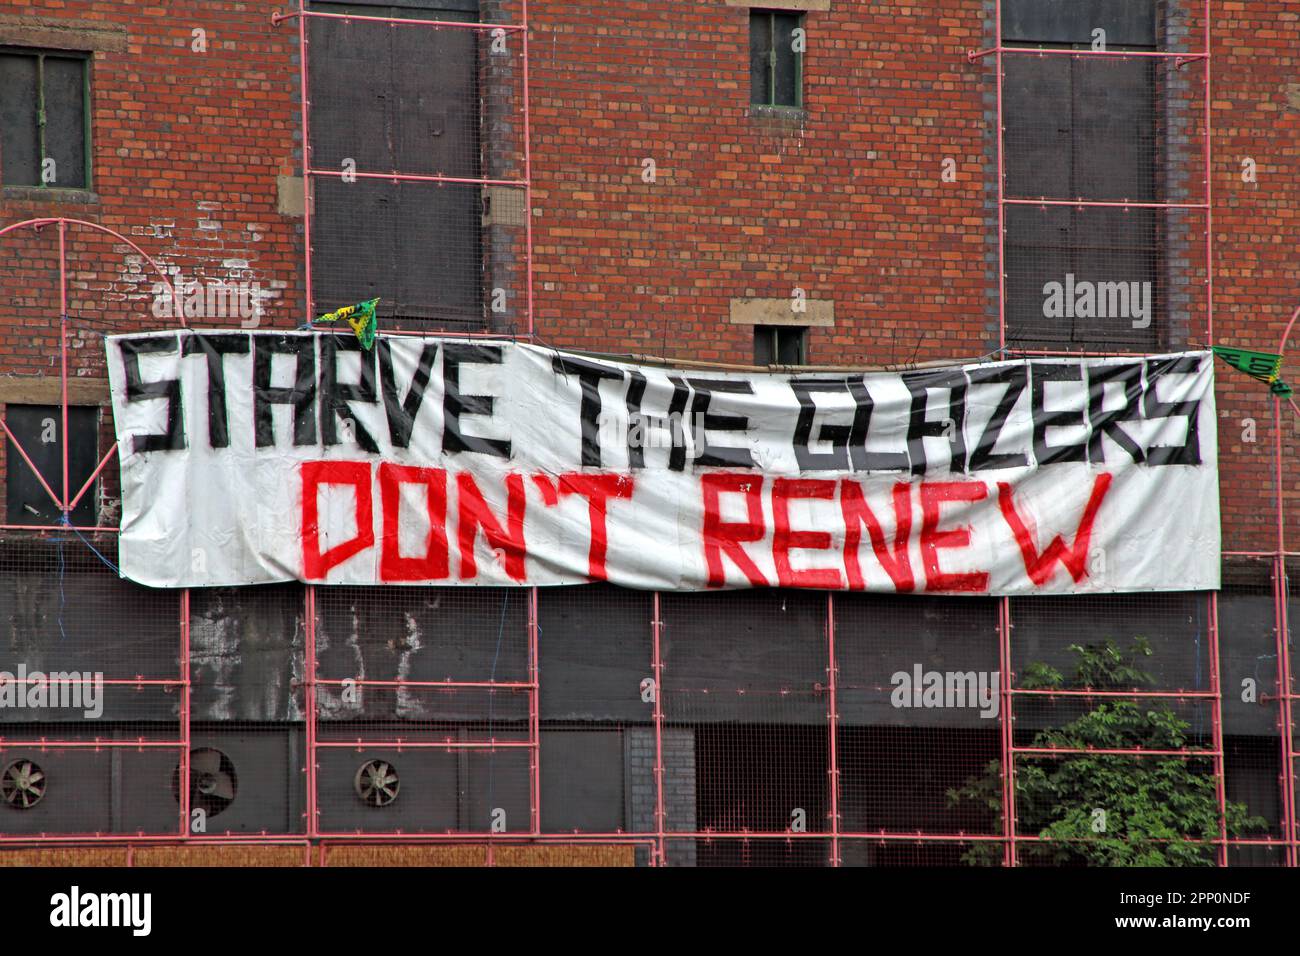 Starve The Glazers, Don't Renew graffiti sign, in Trafford Park, MUFC, Manchester United sale, fan opinion, Manchester, England, UK Stock Photo